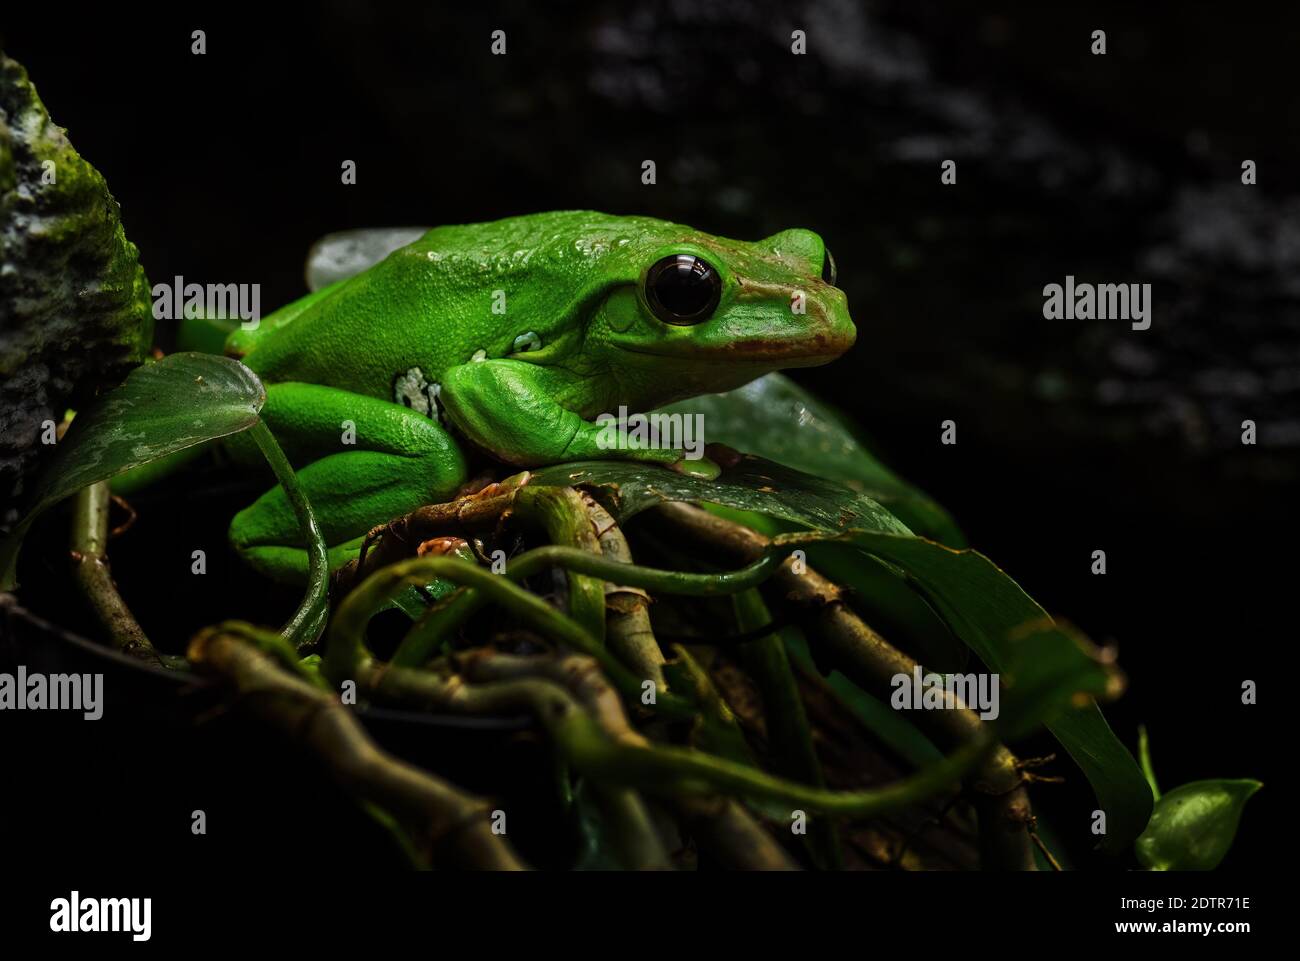 Chinese Flying Frog - Zhangixalus dennysi, beautiful green frog from East Asian forests, China. Stock Photo